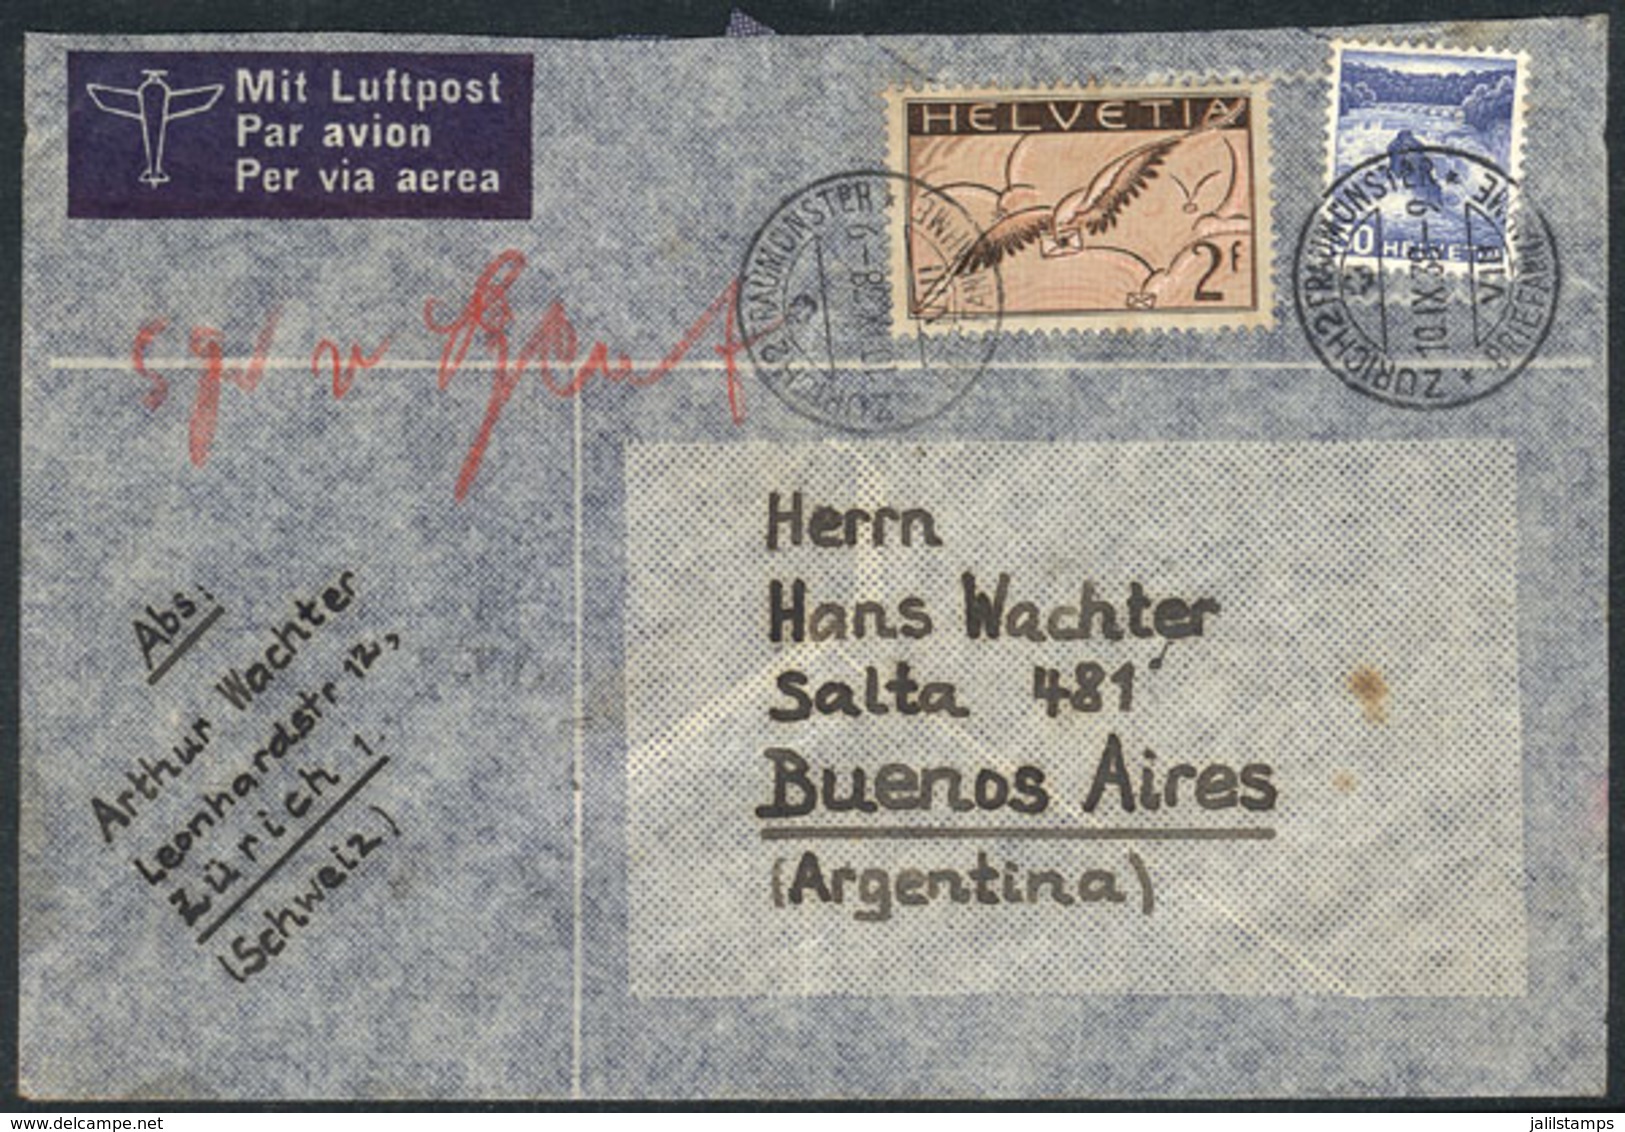 SWITZERLAND: Airmail Cover Franked With 2.30Fr., Sent From Zürich To Argentina On 10/SE/1938, VF! - Briefe U. Dokumente